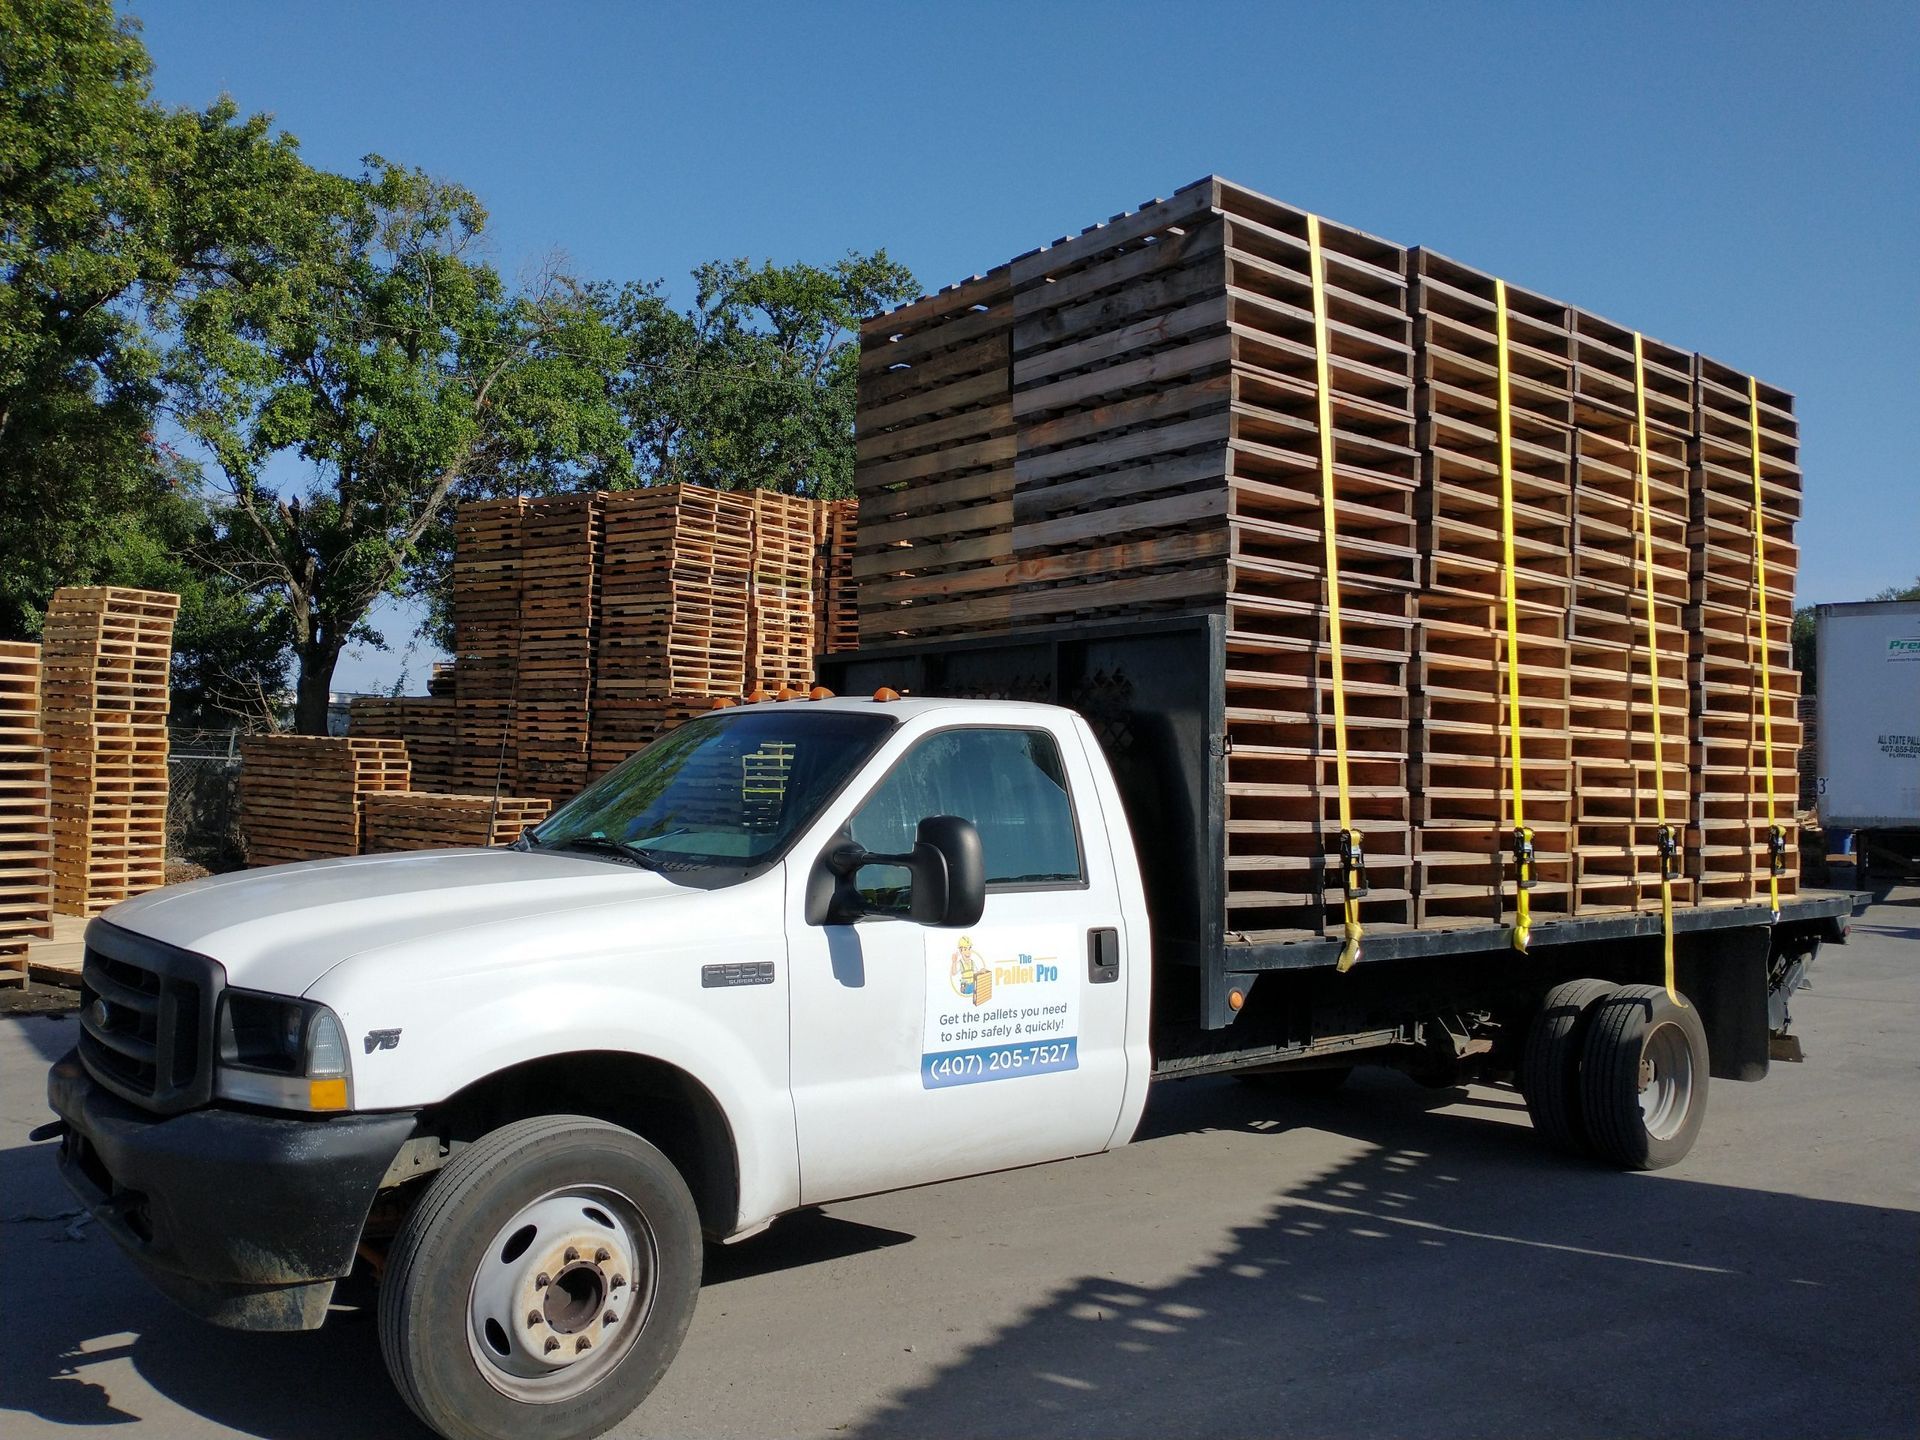 View of Pallet Delivery truck - Mount Dora Pallet Supply